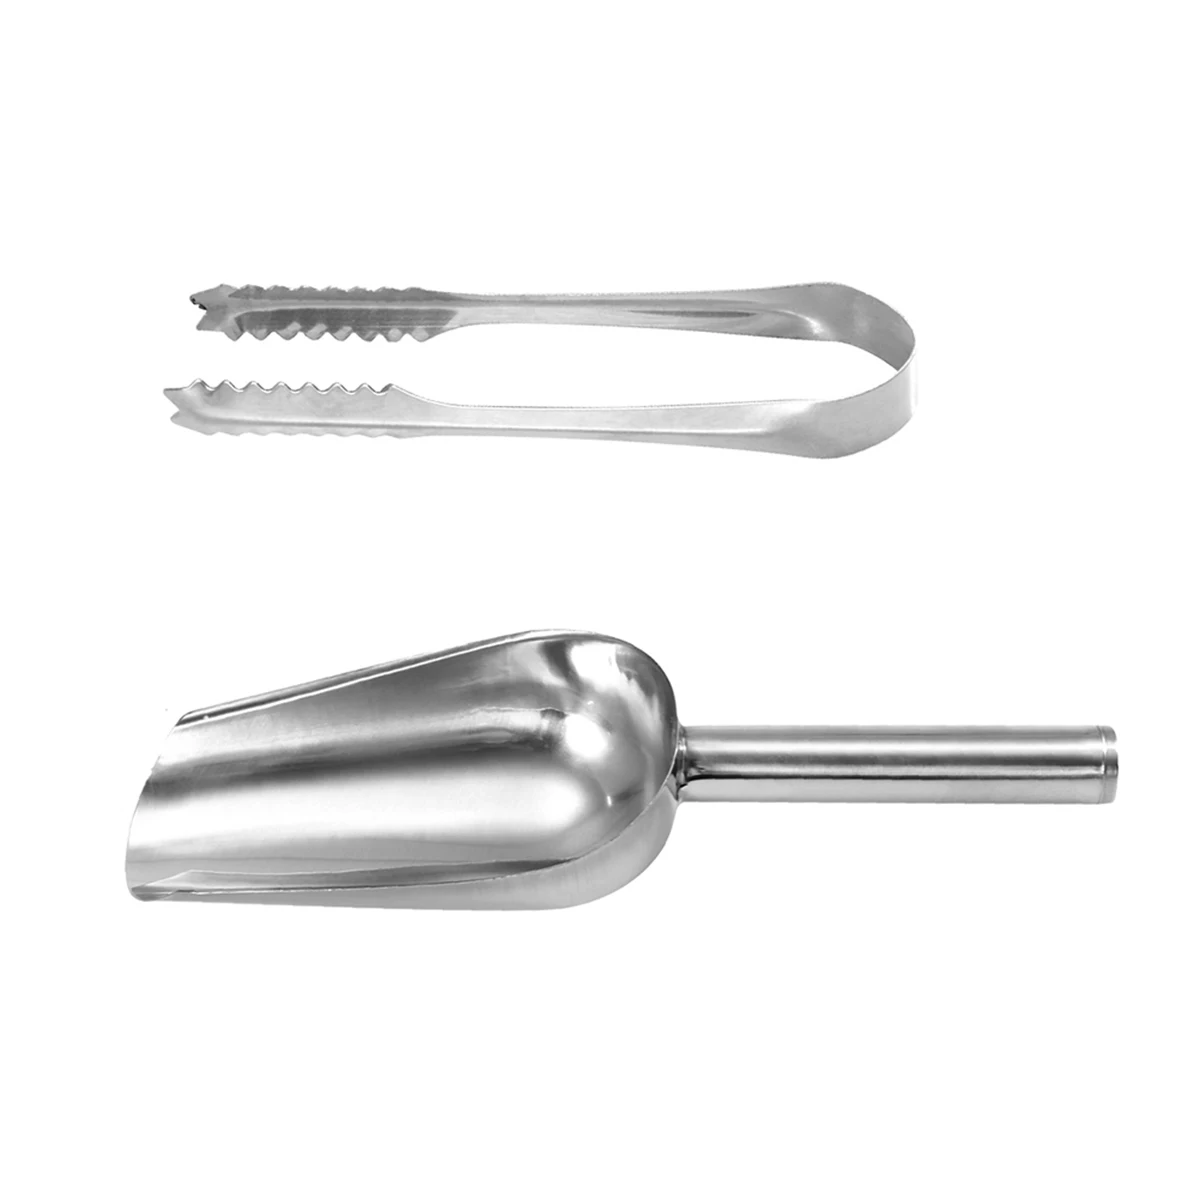 2PCS Stainless Steel Ice Scoop Practical Fine Useful Ice Tongs Utility Scoops Sweet Candy Scoops for Bar Wedding